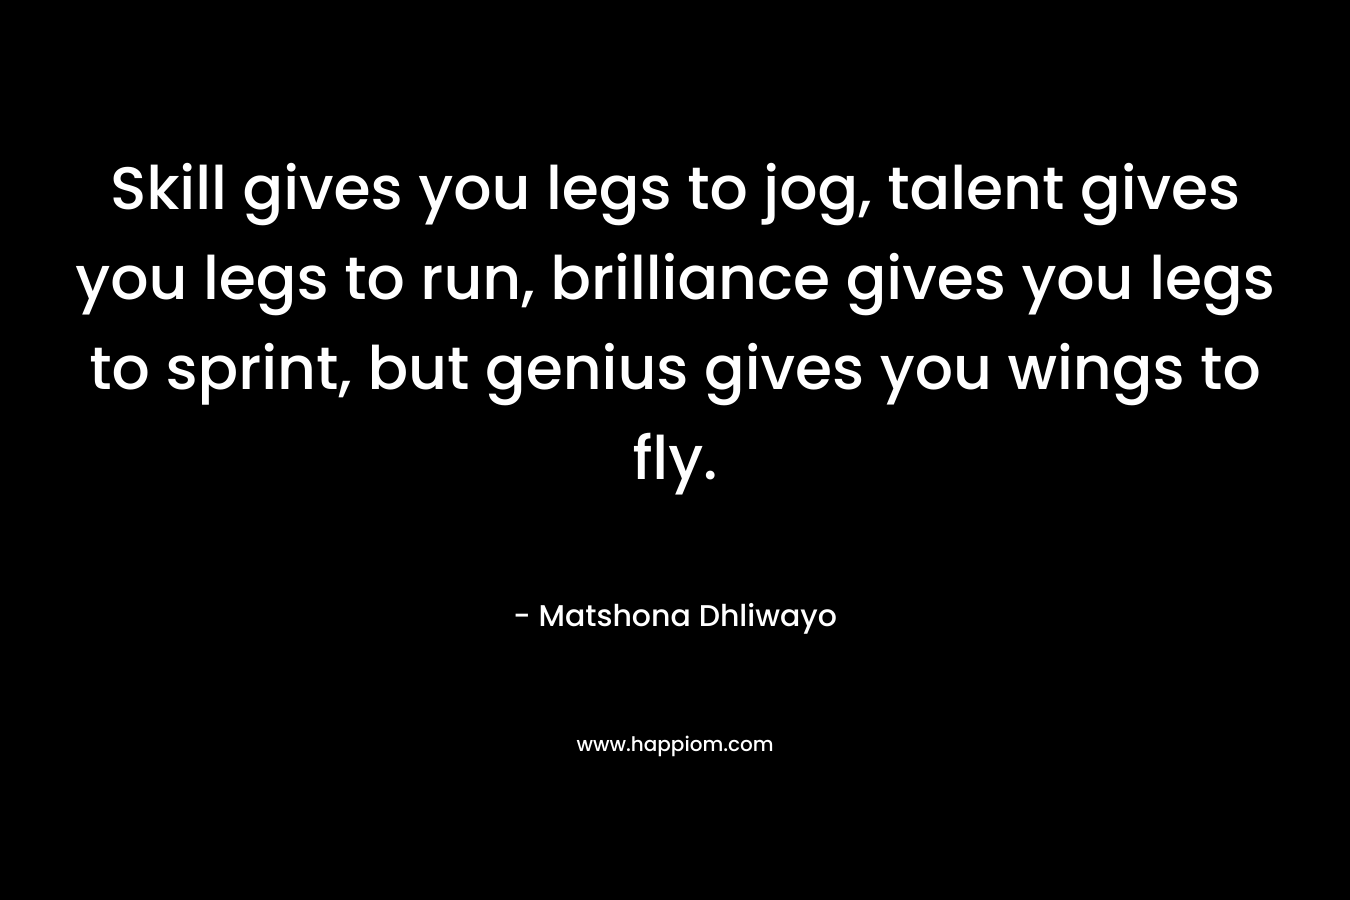 Skill gives you legs to jog, talent gives you legs to run, brilliance gives you legs to sprint, but genius gives you wings to fly. – Matshona Dhliwayo